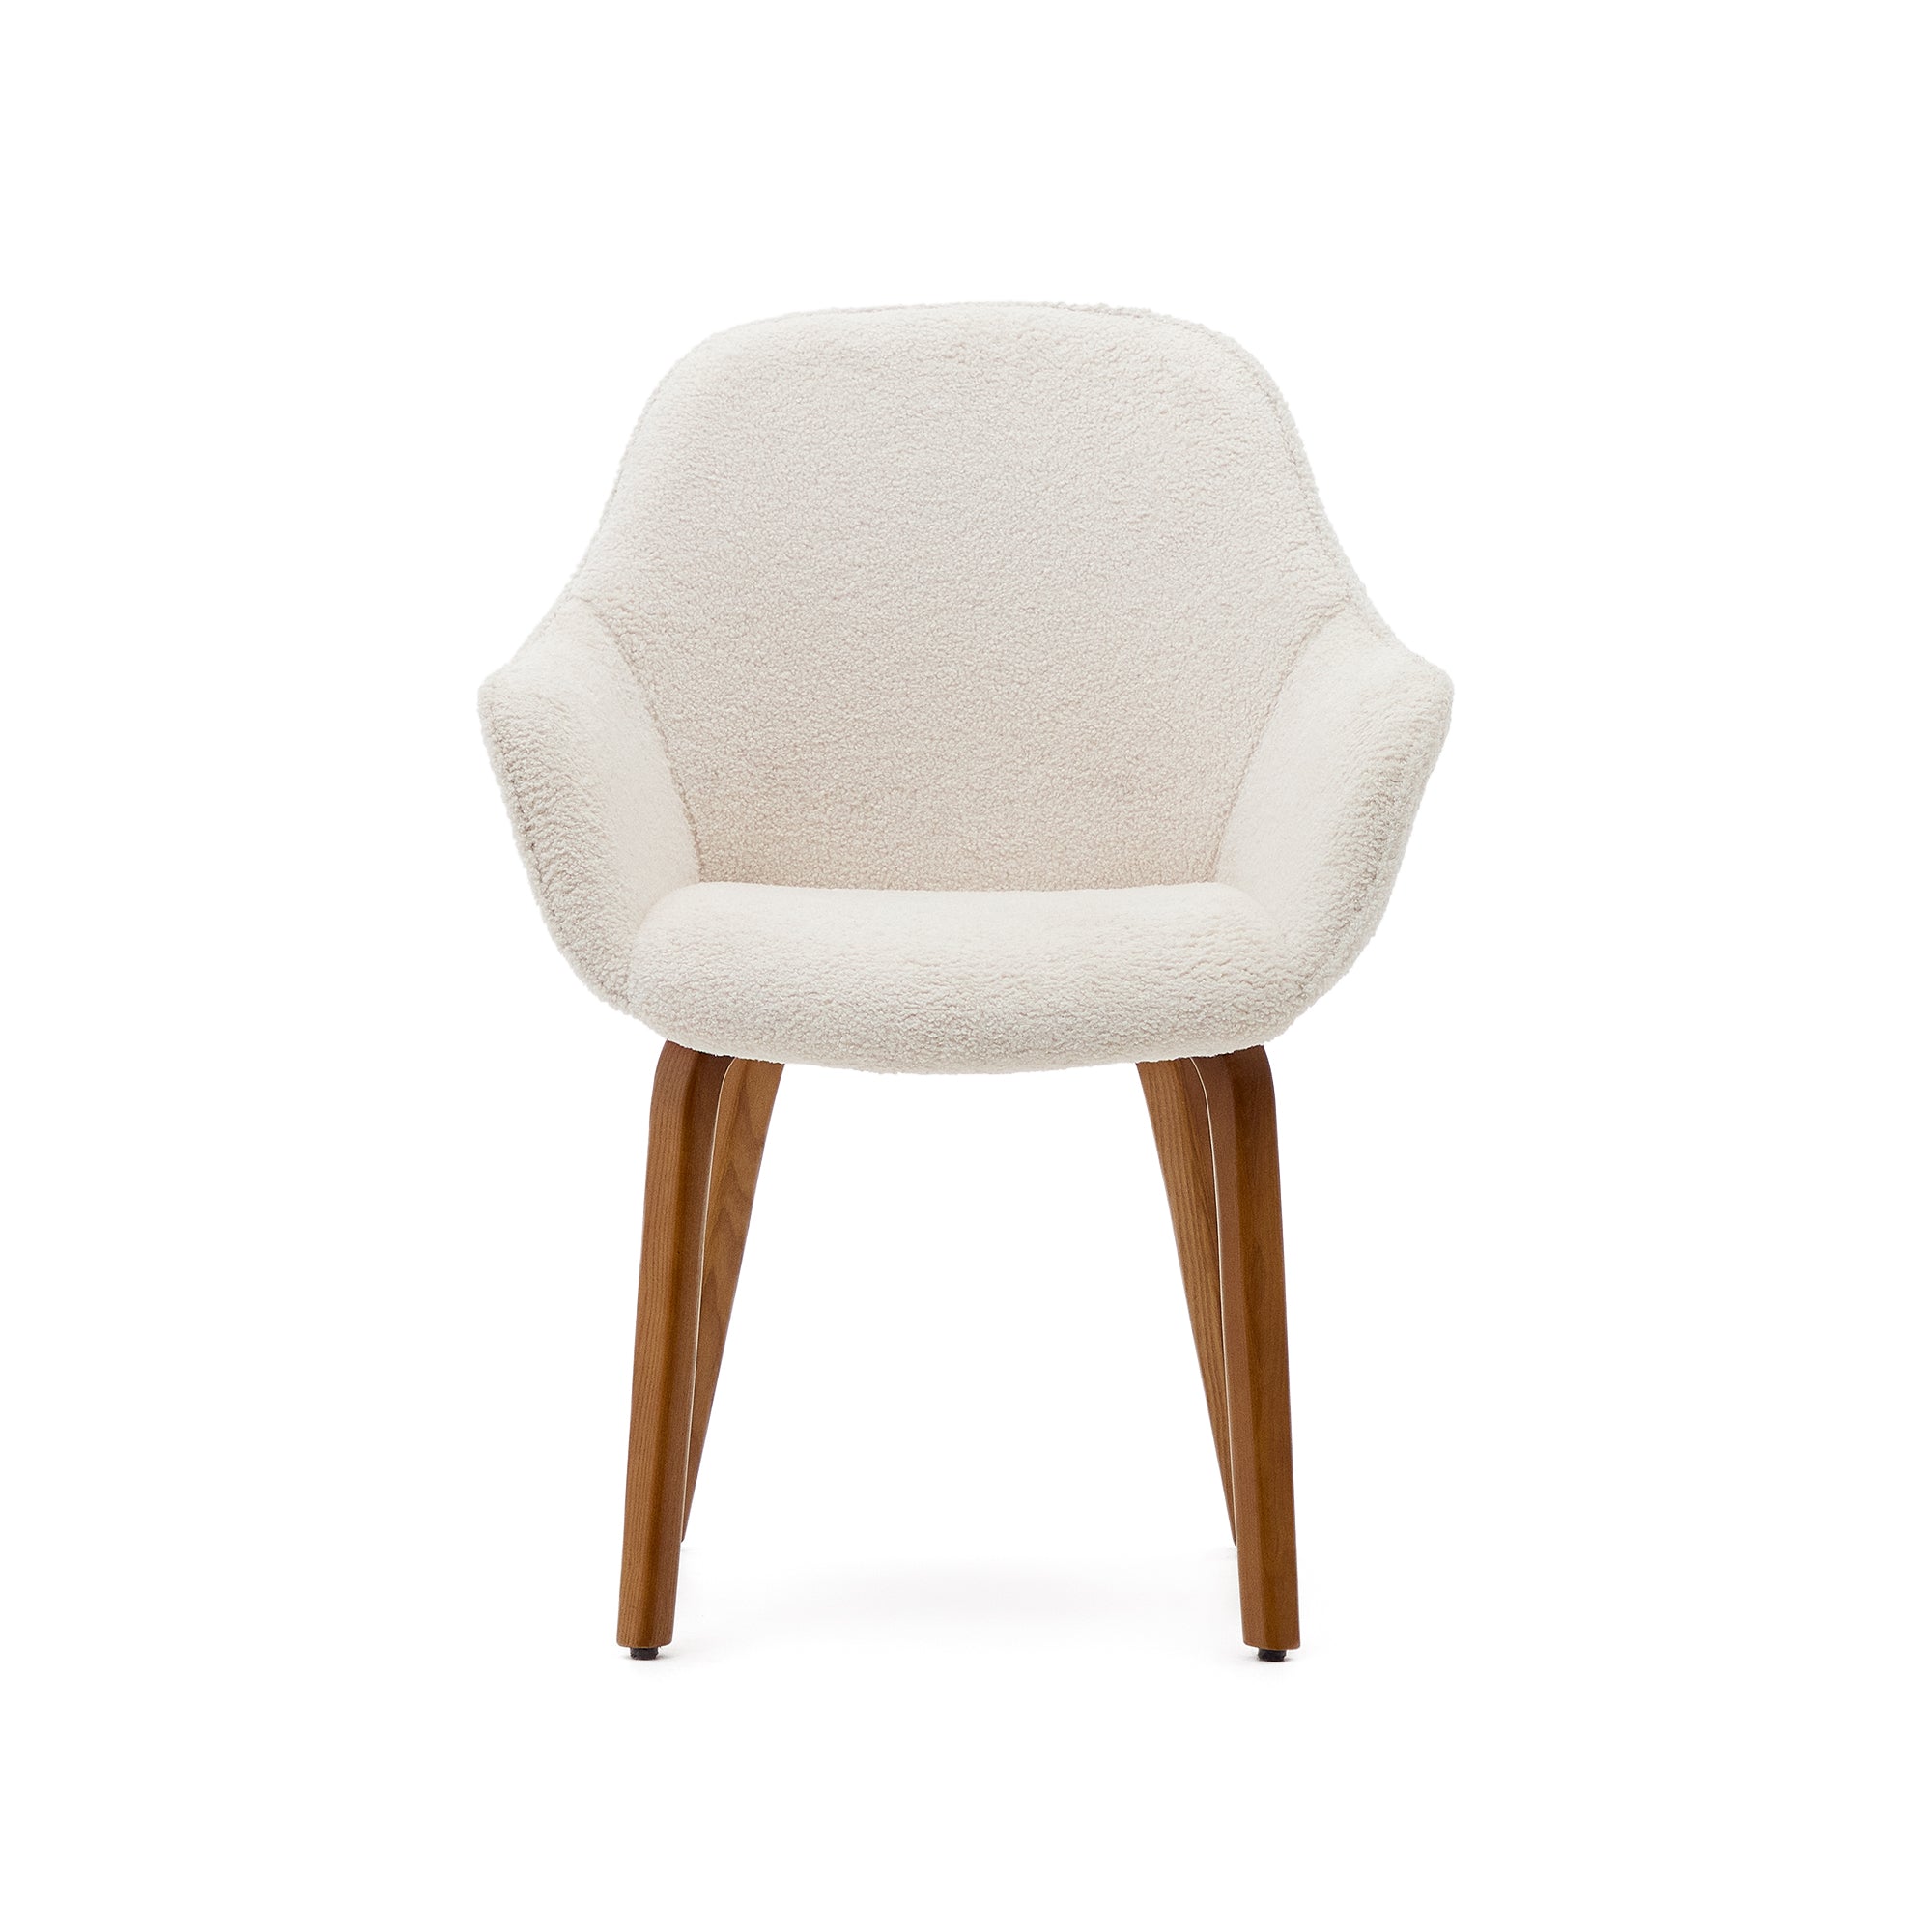 Aleli chair in white shearling with solid ash wood legs and walnut finish